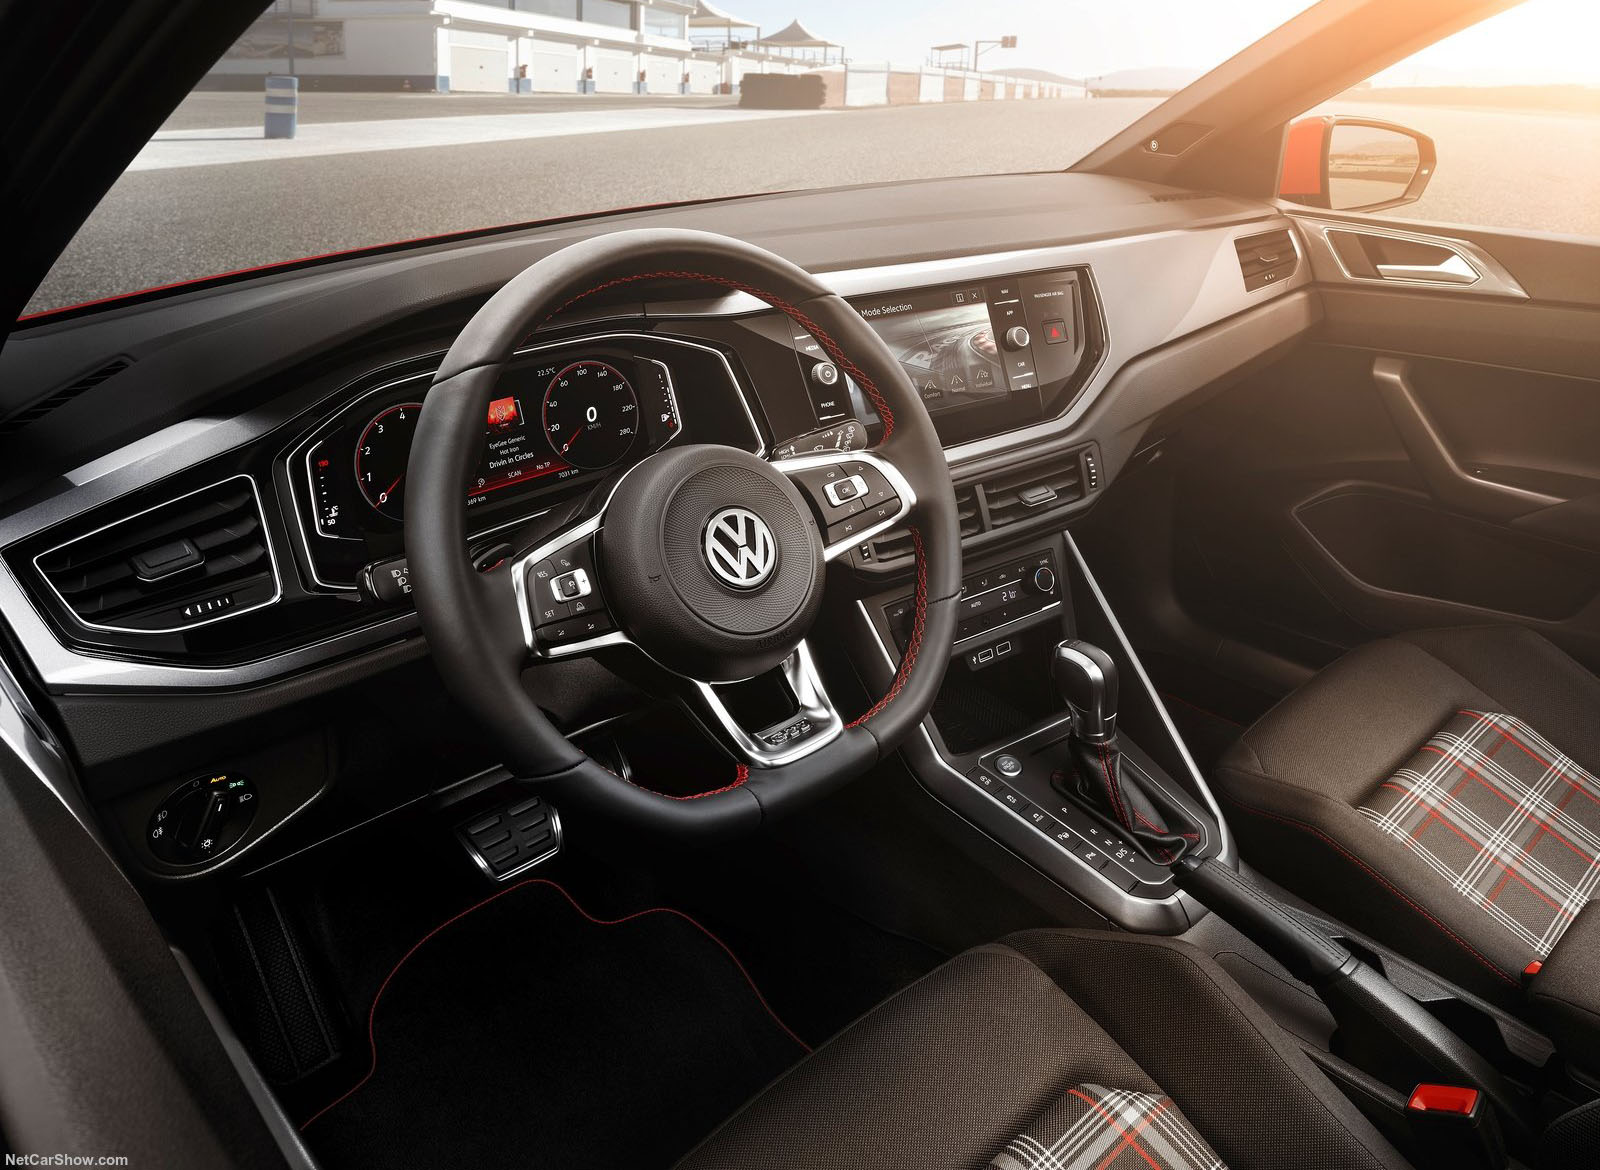 Volkswagen New Polo Gti 2018 Interior Image Gallery, Pictures, Photos